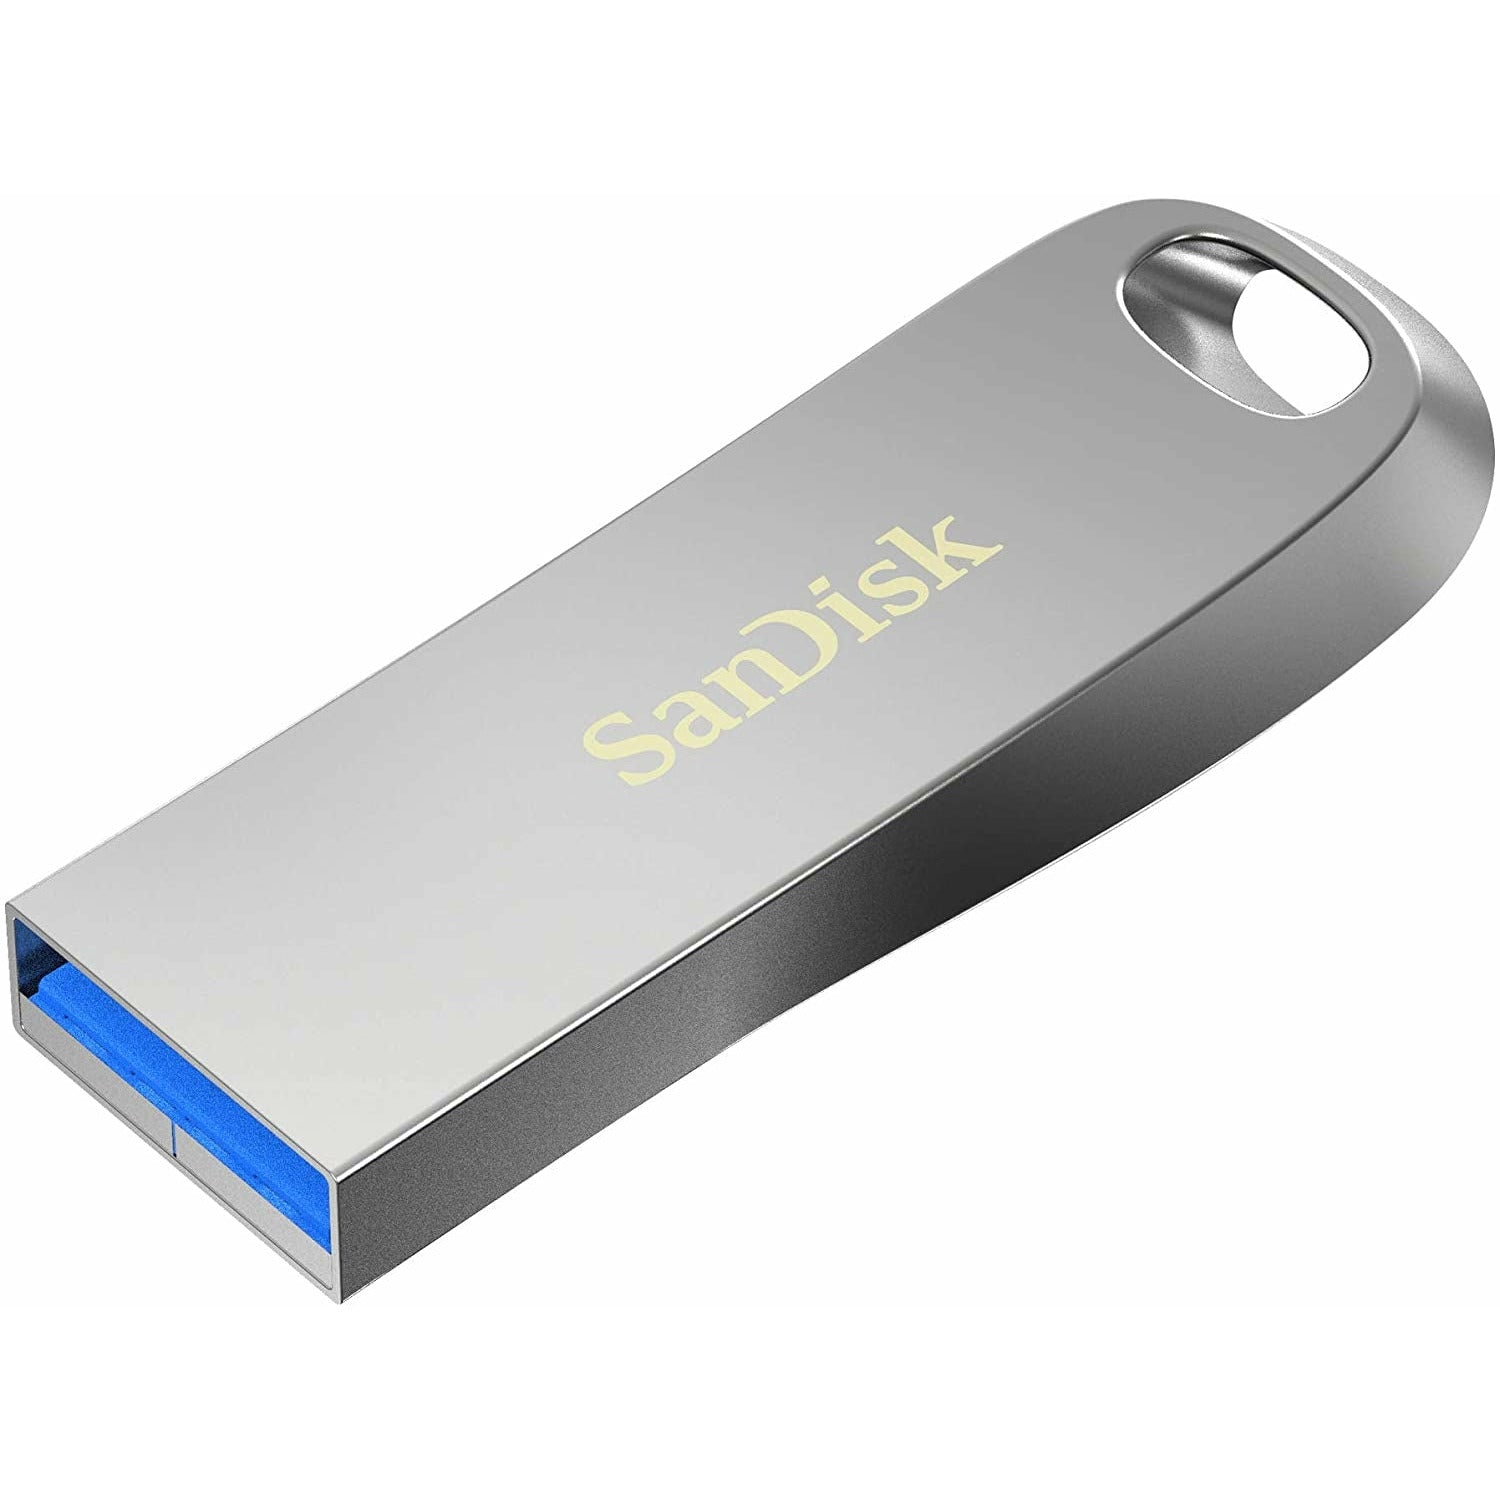 SANDISK SDCZ74-512G-G46 512G  ULTRA LUXE PEN DRIVE 150MB USB 3.0 METAL